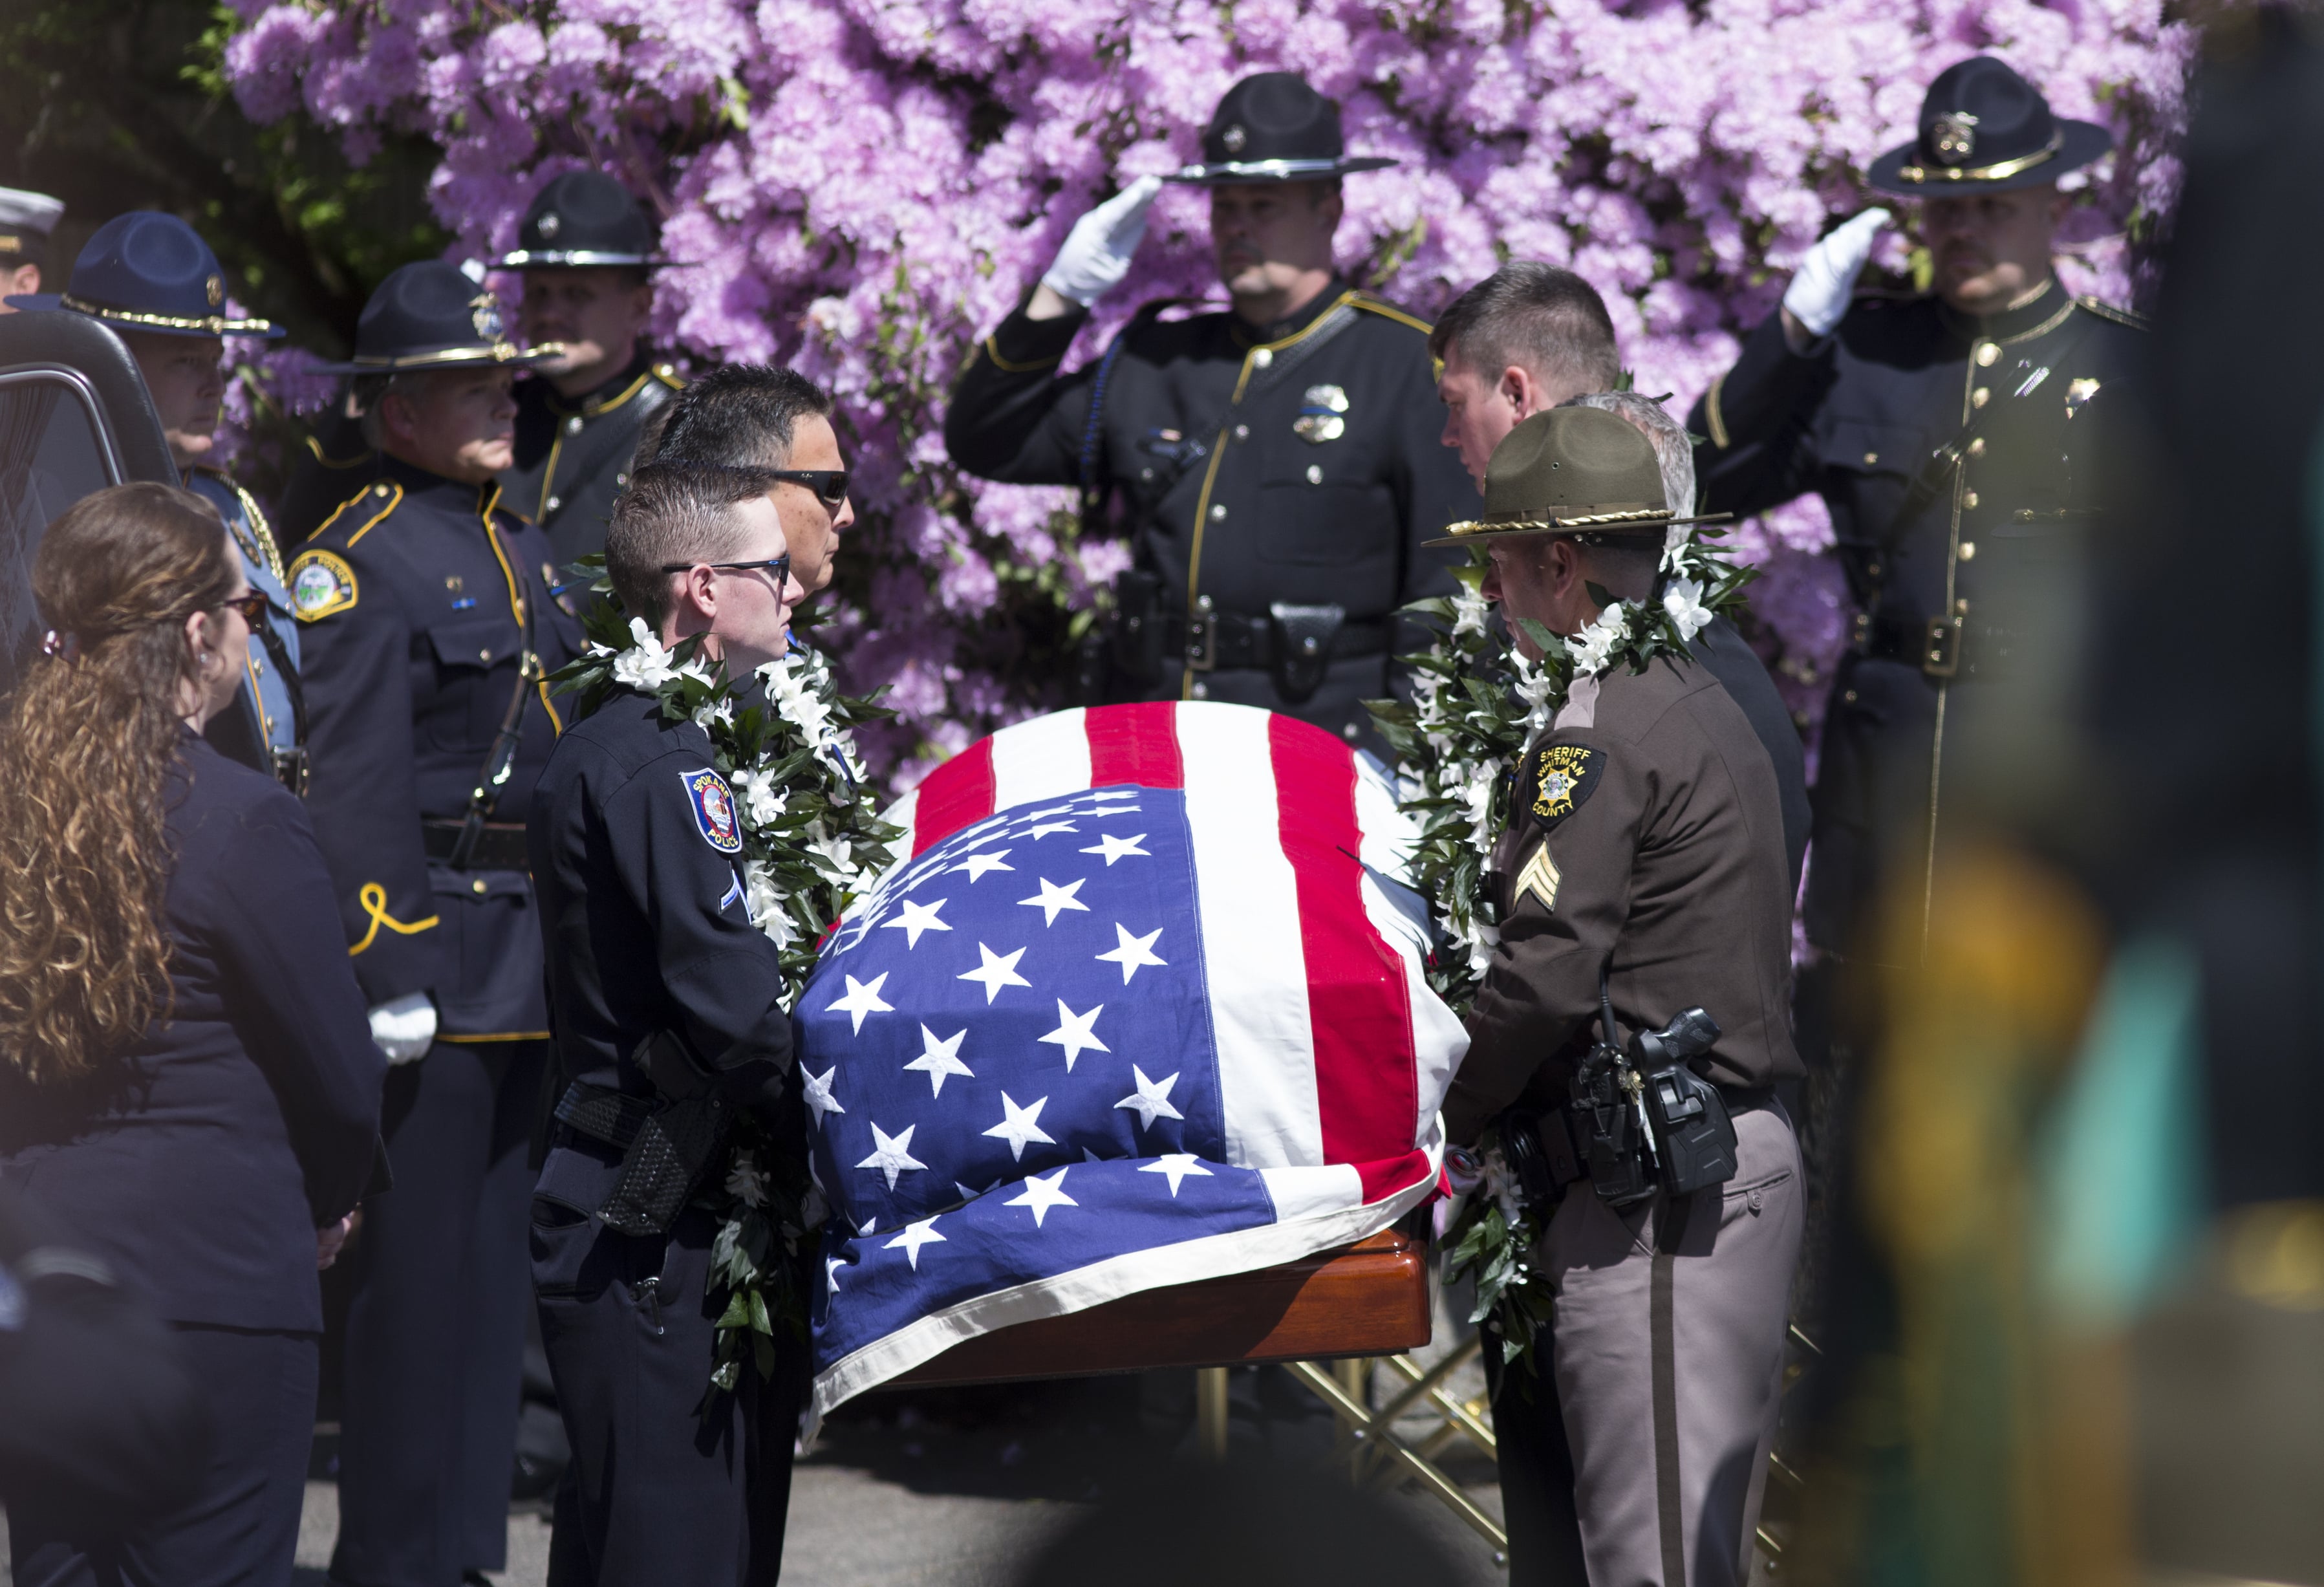 An honor guard carries the casket of Cowlitz County sheriff's Deputy Justin DeRosier as a procession makes its way to the Chiles Center at the University of Portland, where a memorial service is taking place for the slain deputy, Wednesday, April 24, 2019 in Portland, Ore.